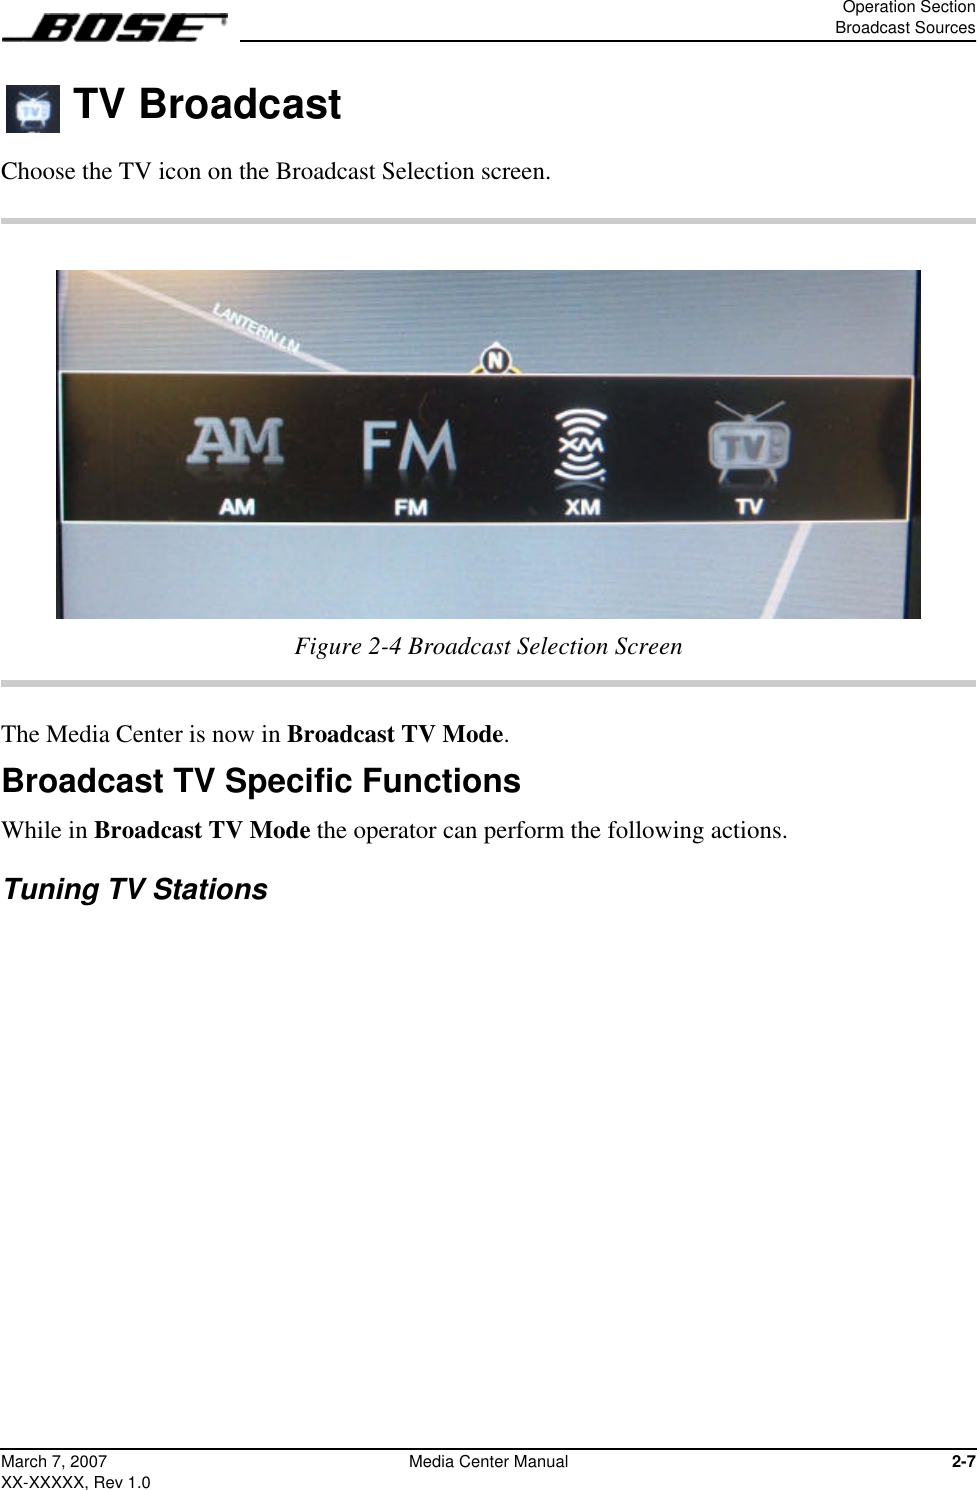 Operation SectionBroadcast Sources2-7March 7, 2007XX-XXXXX, Rev 1.0Media Center Manual TV BroadcastChoose the TV icon on the Broadcast Selection screen.Figure 2-4 Broadcast Selection ScreenThe Media Center is now in Broadcast TV Mode.Broadcast TV Specific FunctionsWhile in Broadcast TV Mode the operator can perform the following actions.Tuning TV Stations